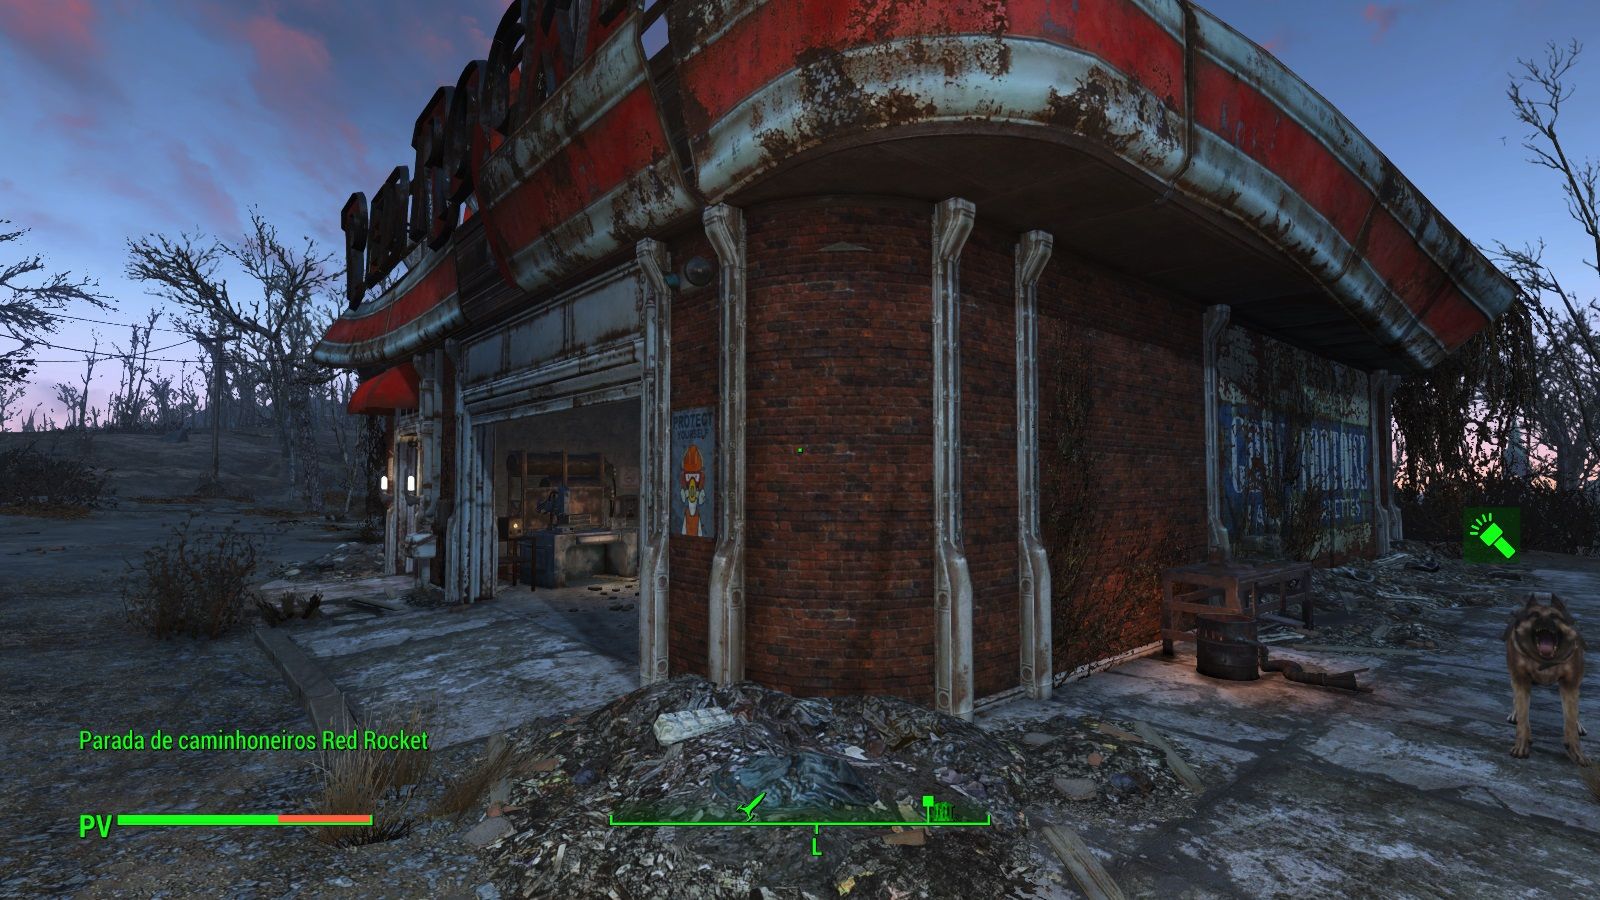 Image from a Fallout 4 mod showing a more detailed garage.